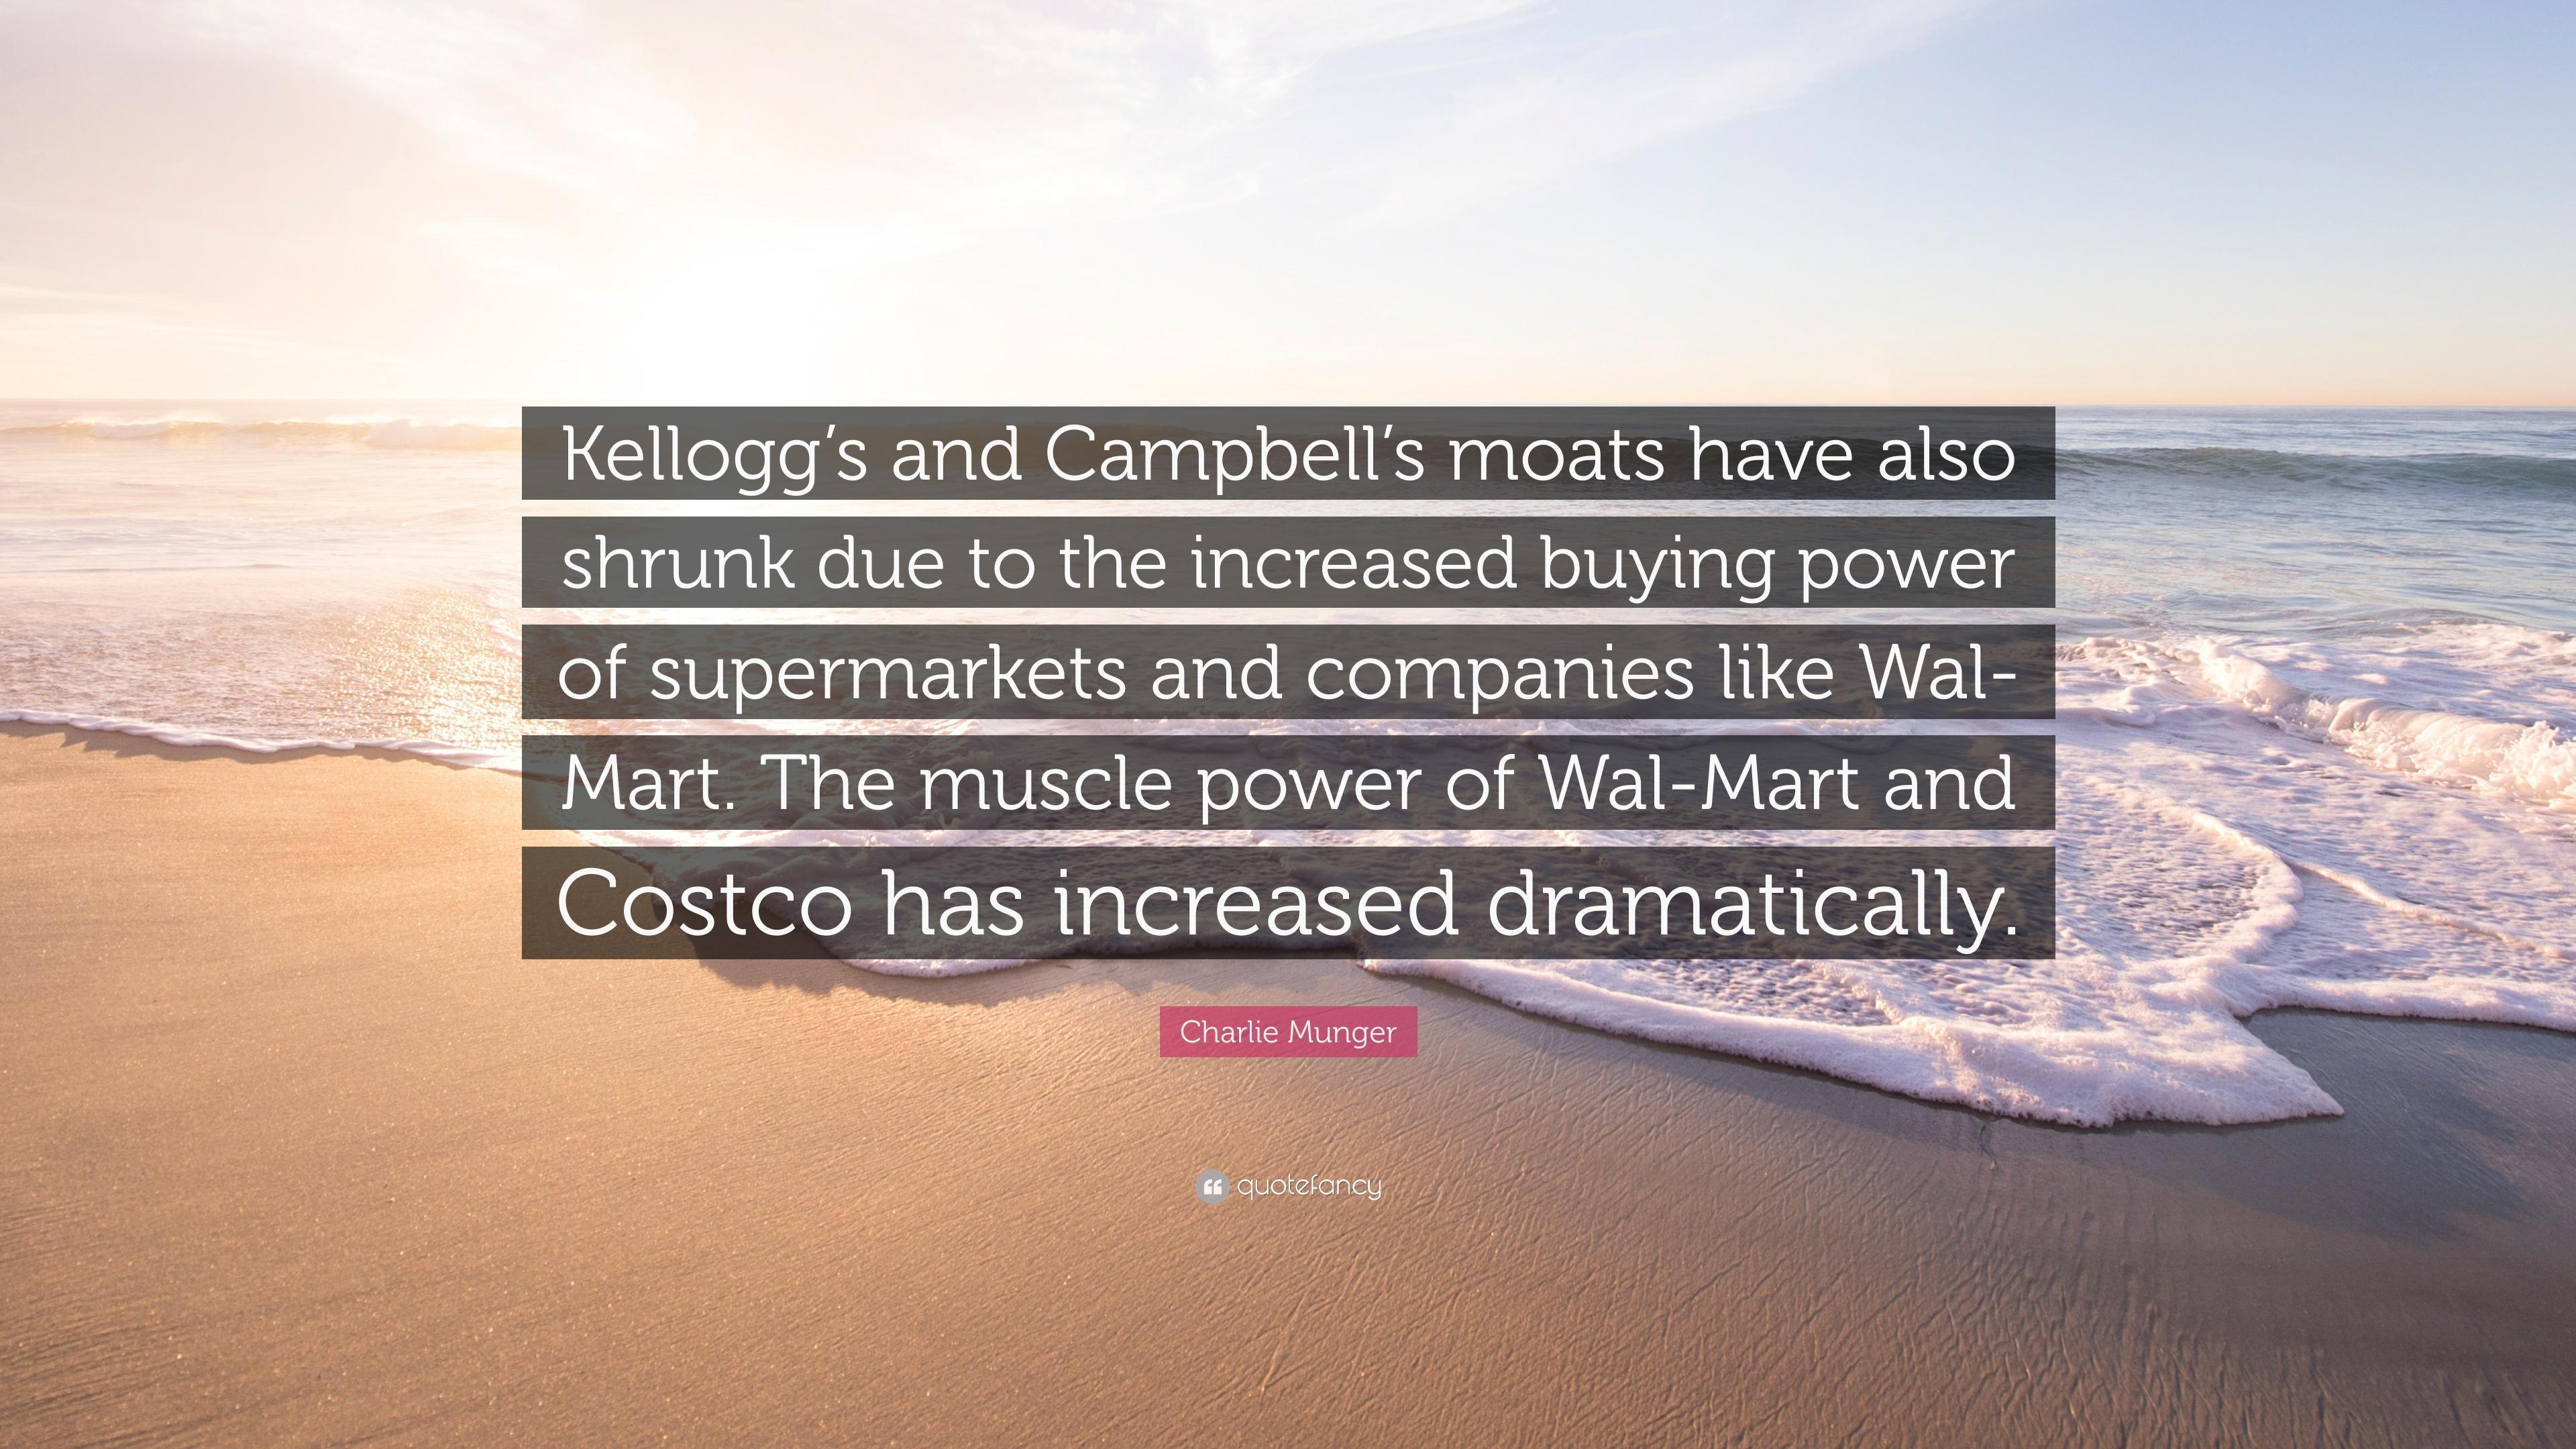 Charlie Munger Quote: “Kellogg's and Campbell's moats have also